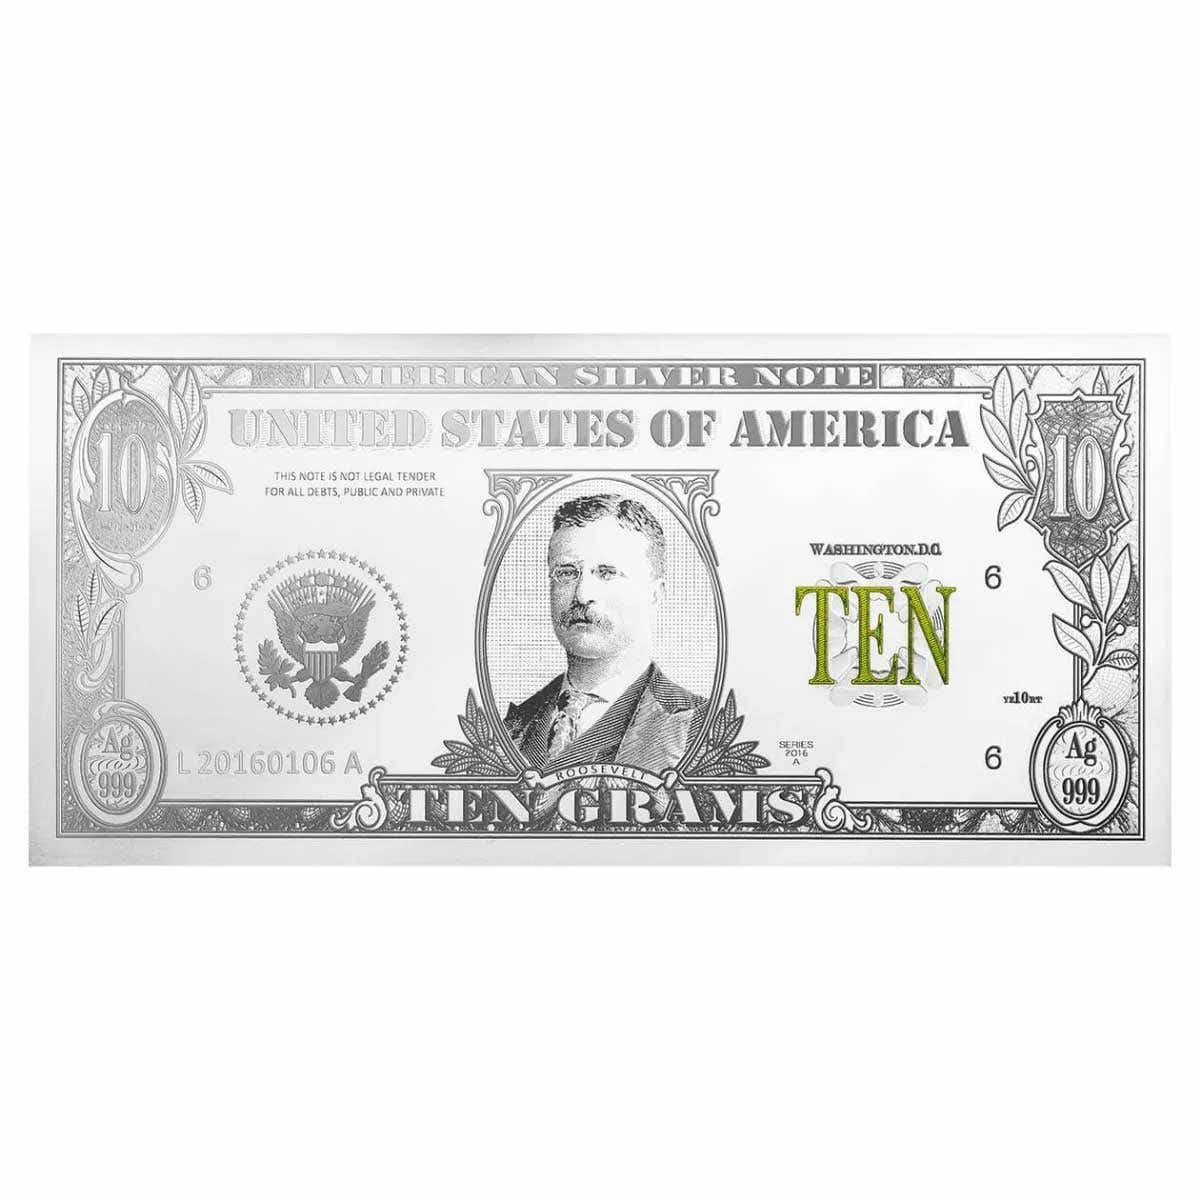 American Silver Notes Theodore Roosevelt $10 Banknote